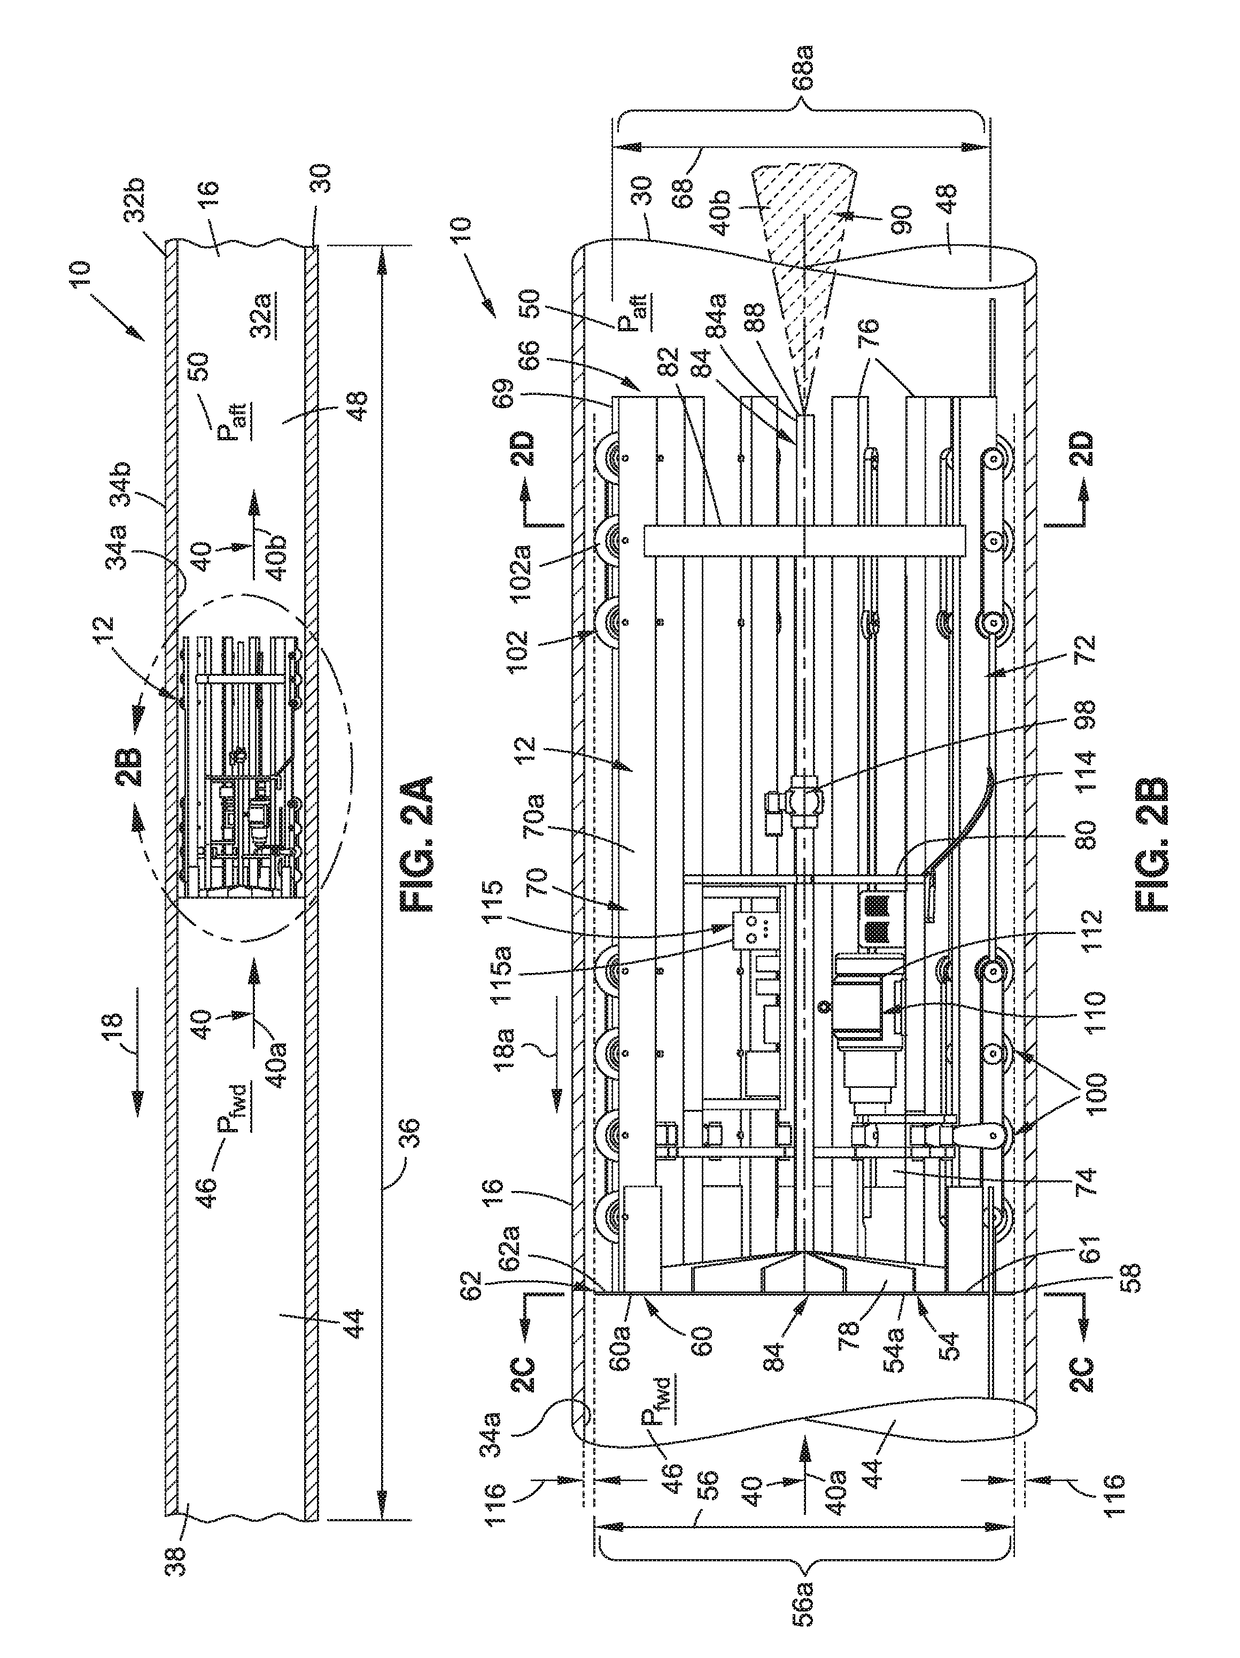 Vacuum transport tube vehicle, system, and method for evacuating a vacuum transport tube